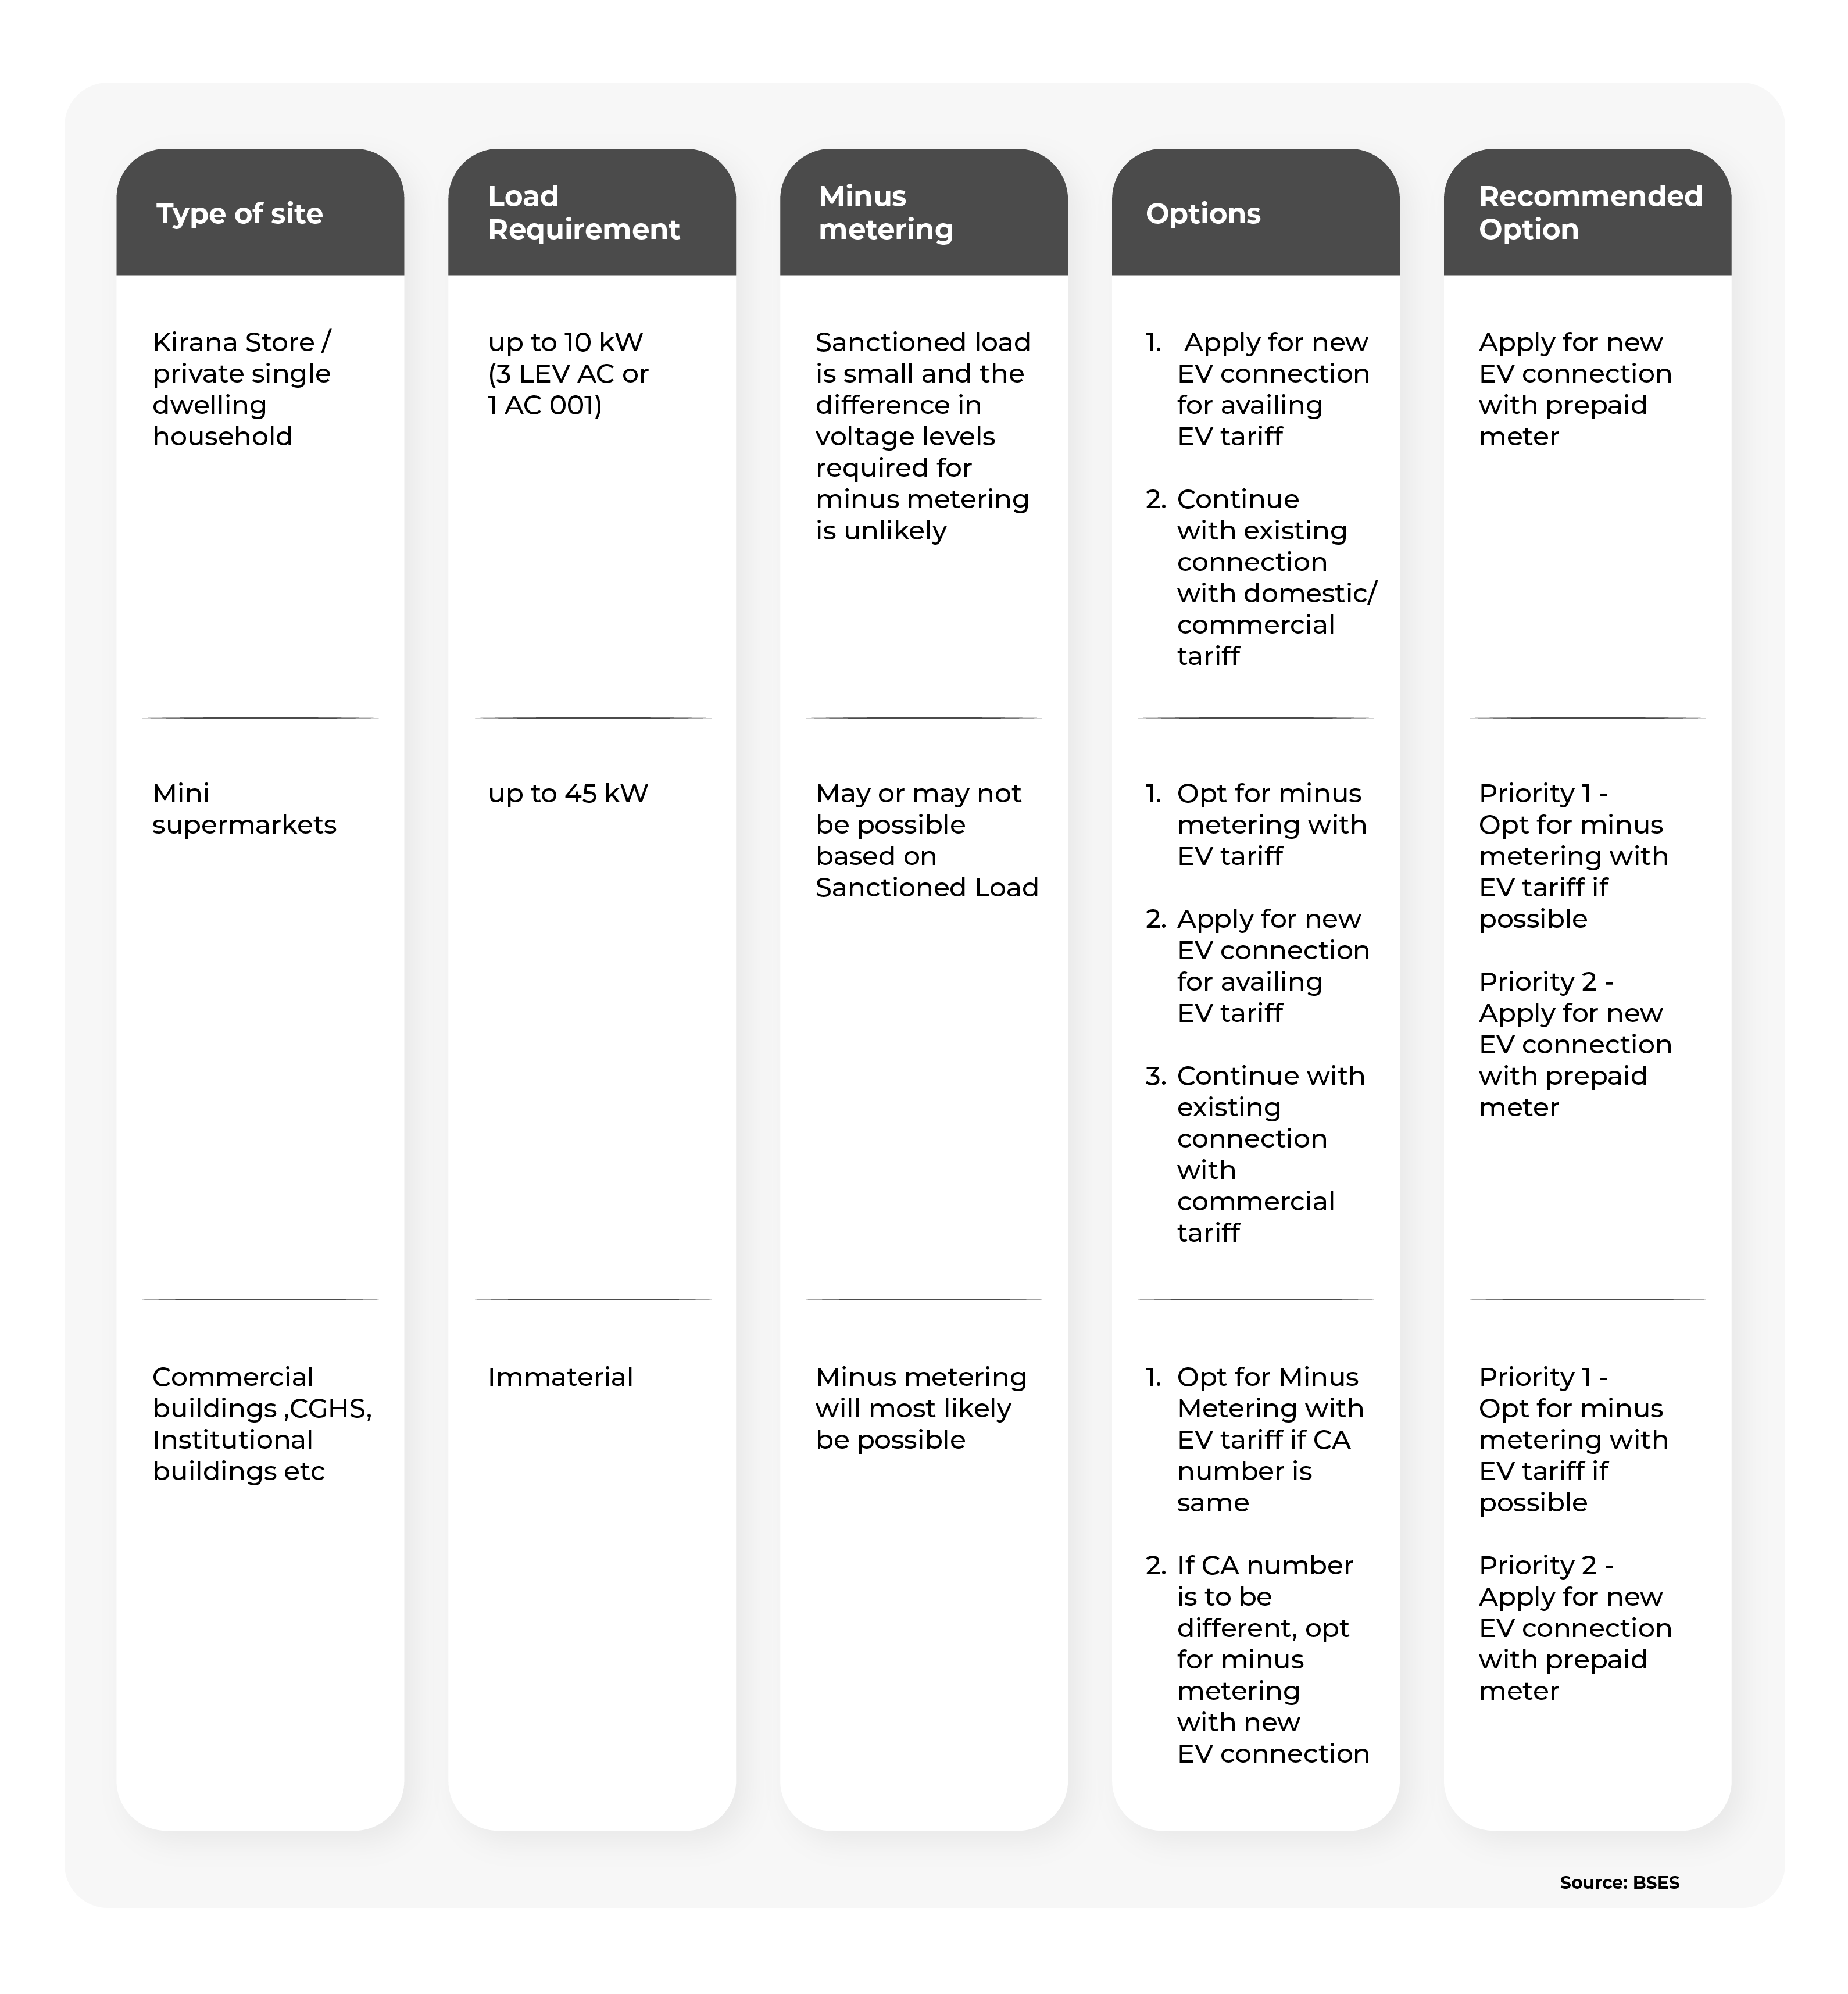 Table of the different criteria and options to choose a new EV connection.